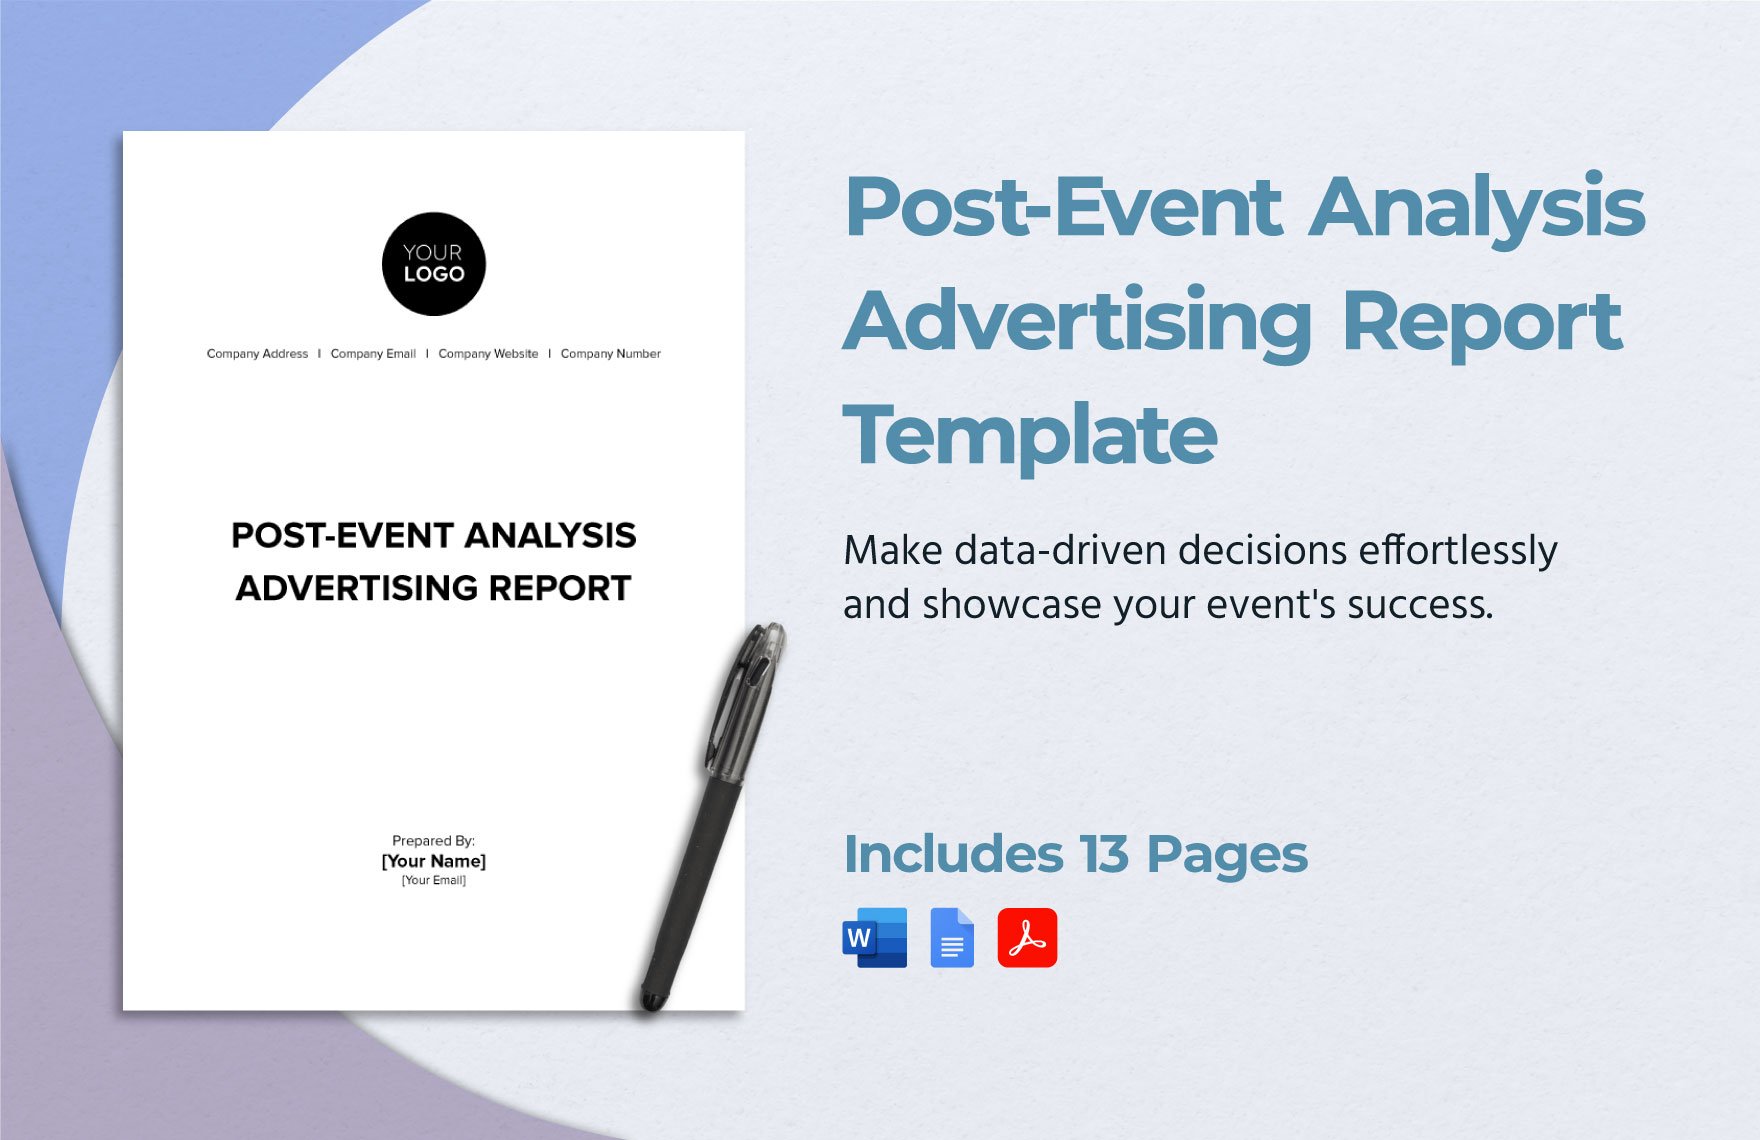 Post-Event Analysis Advertising Report Template